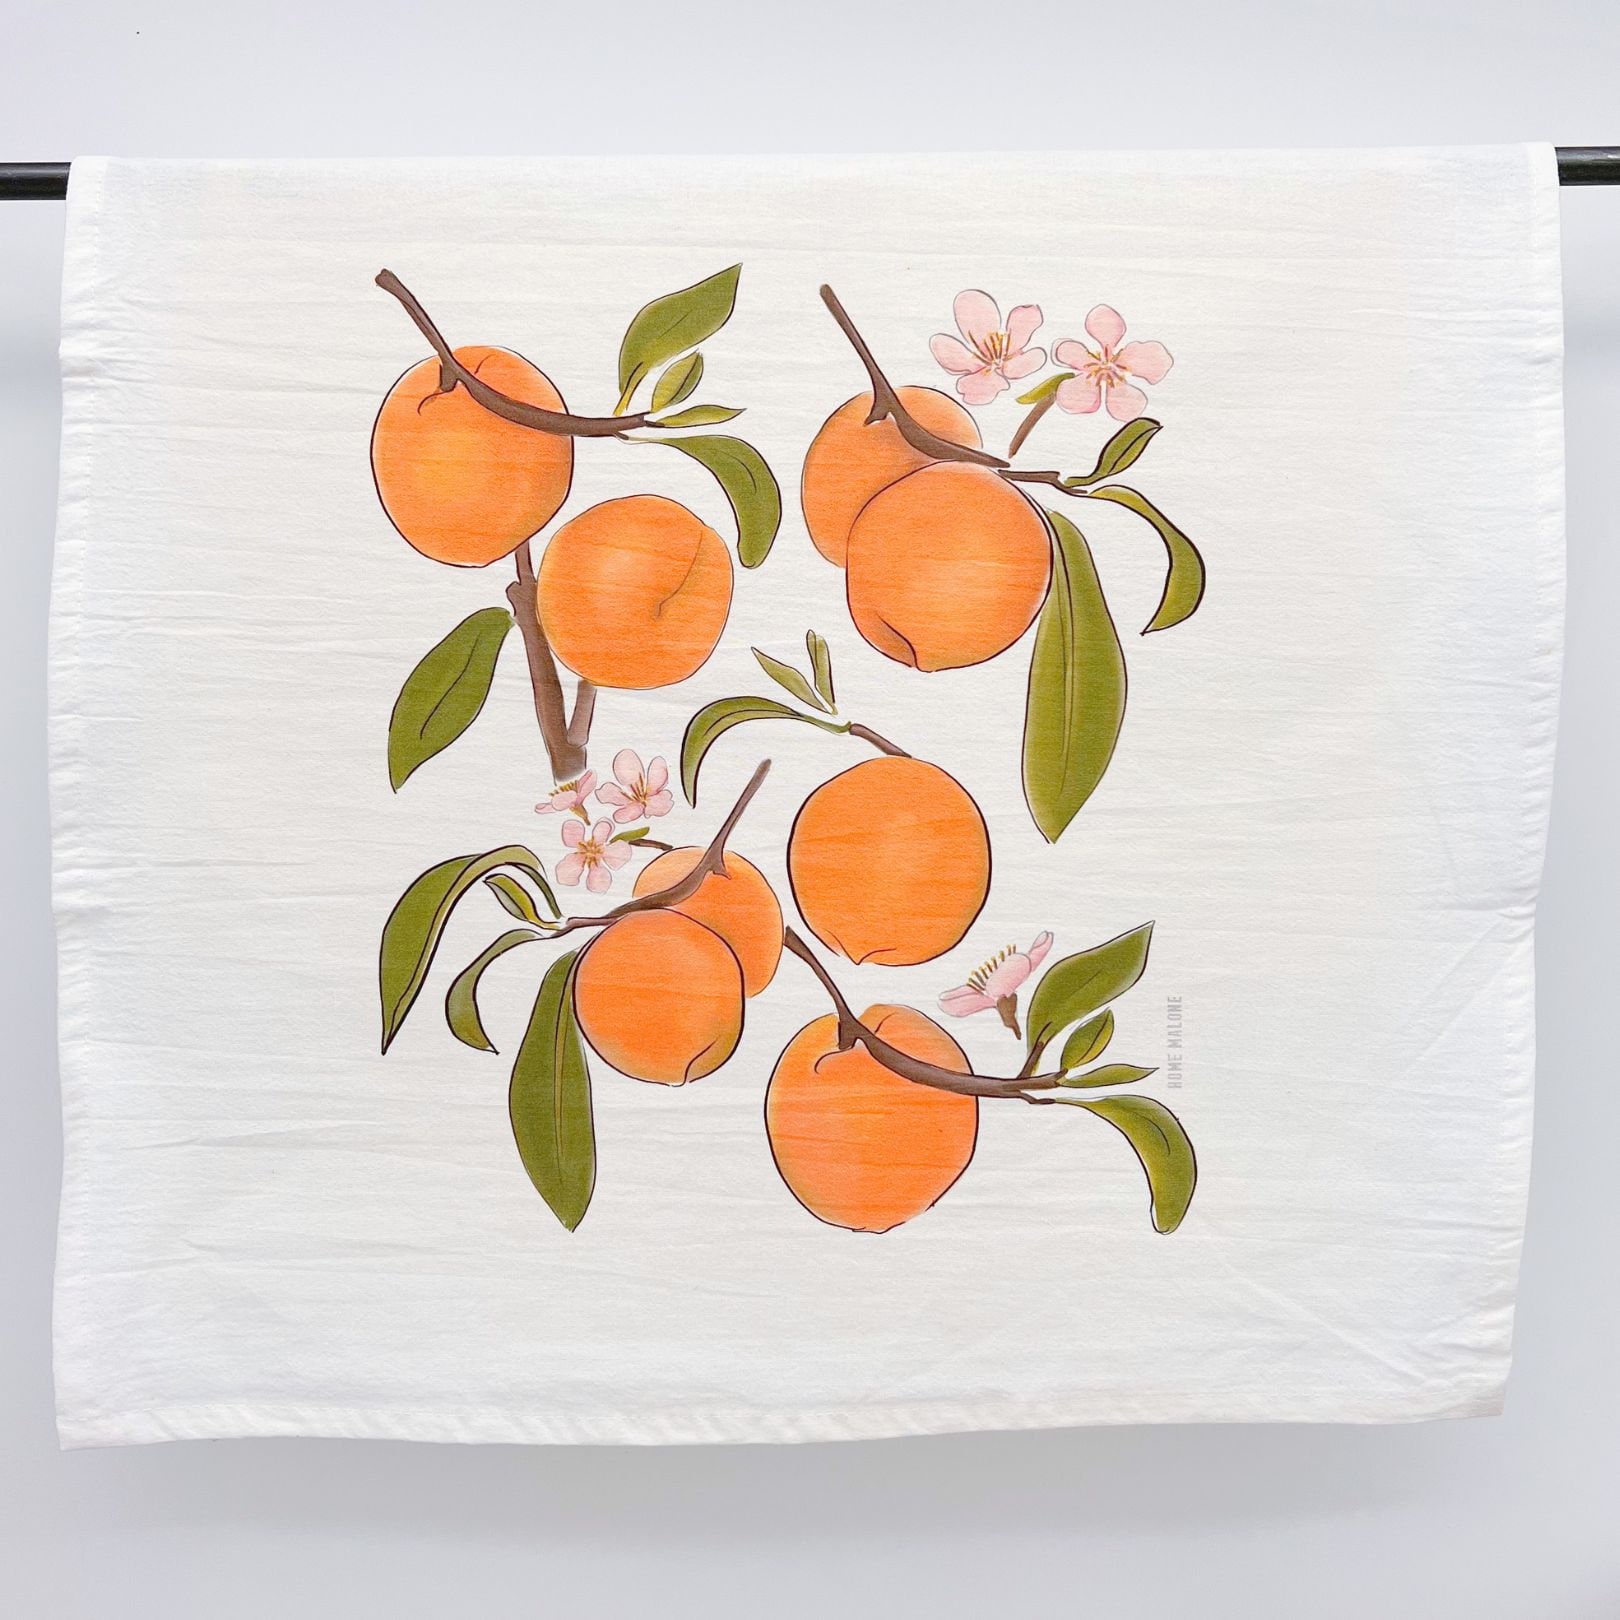 So Young Magazine - Sleeves: Tangerines - A fully illustrated new